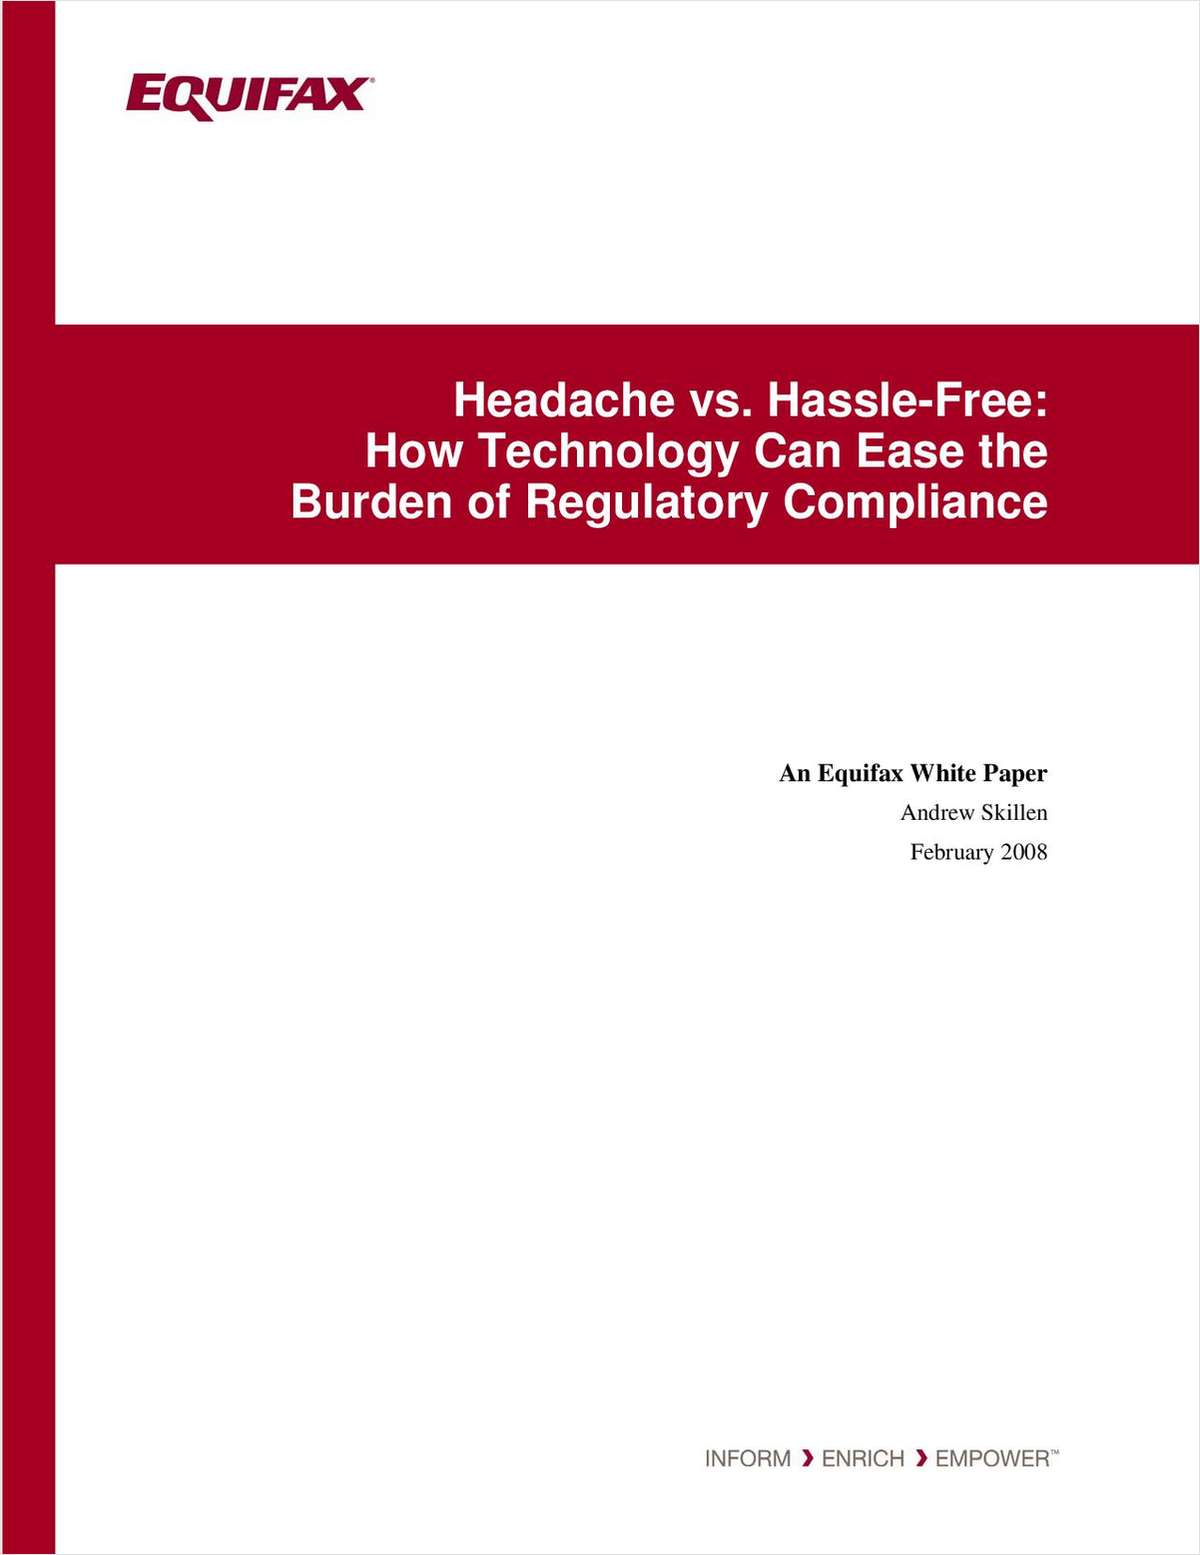 Headache vs. Hassle-Free: How Technology Can Ease the Burden of Regulatory Compliance